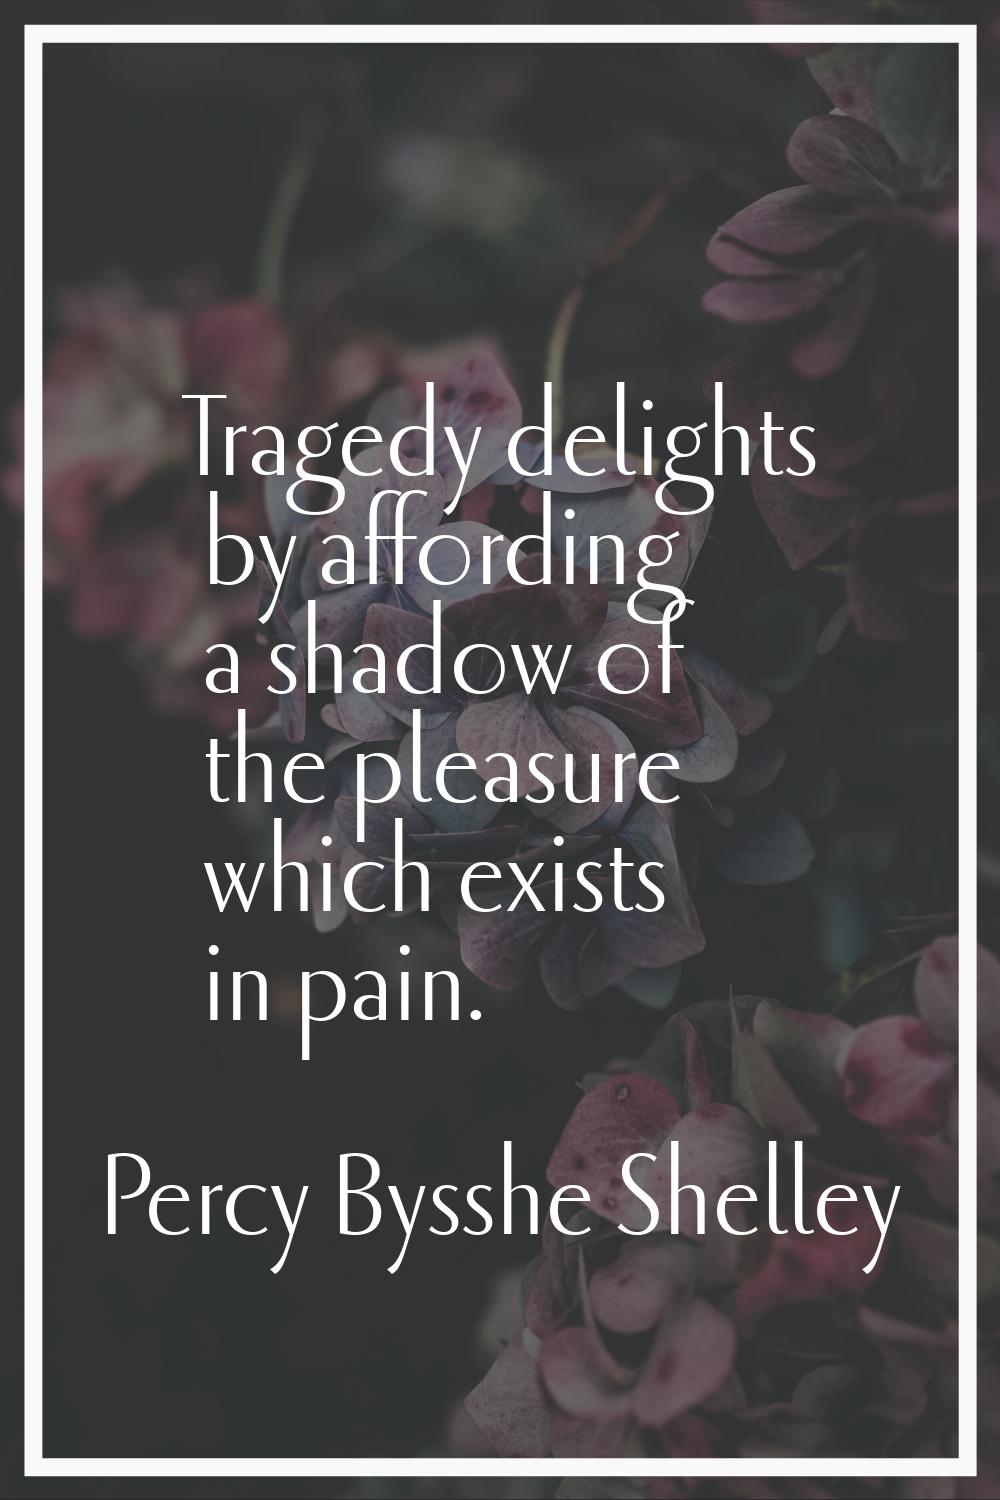 Tragedy delights by affording a shadow of the pleasure which exists in pain.